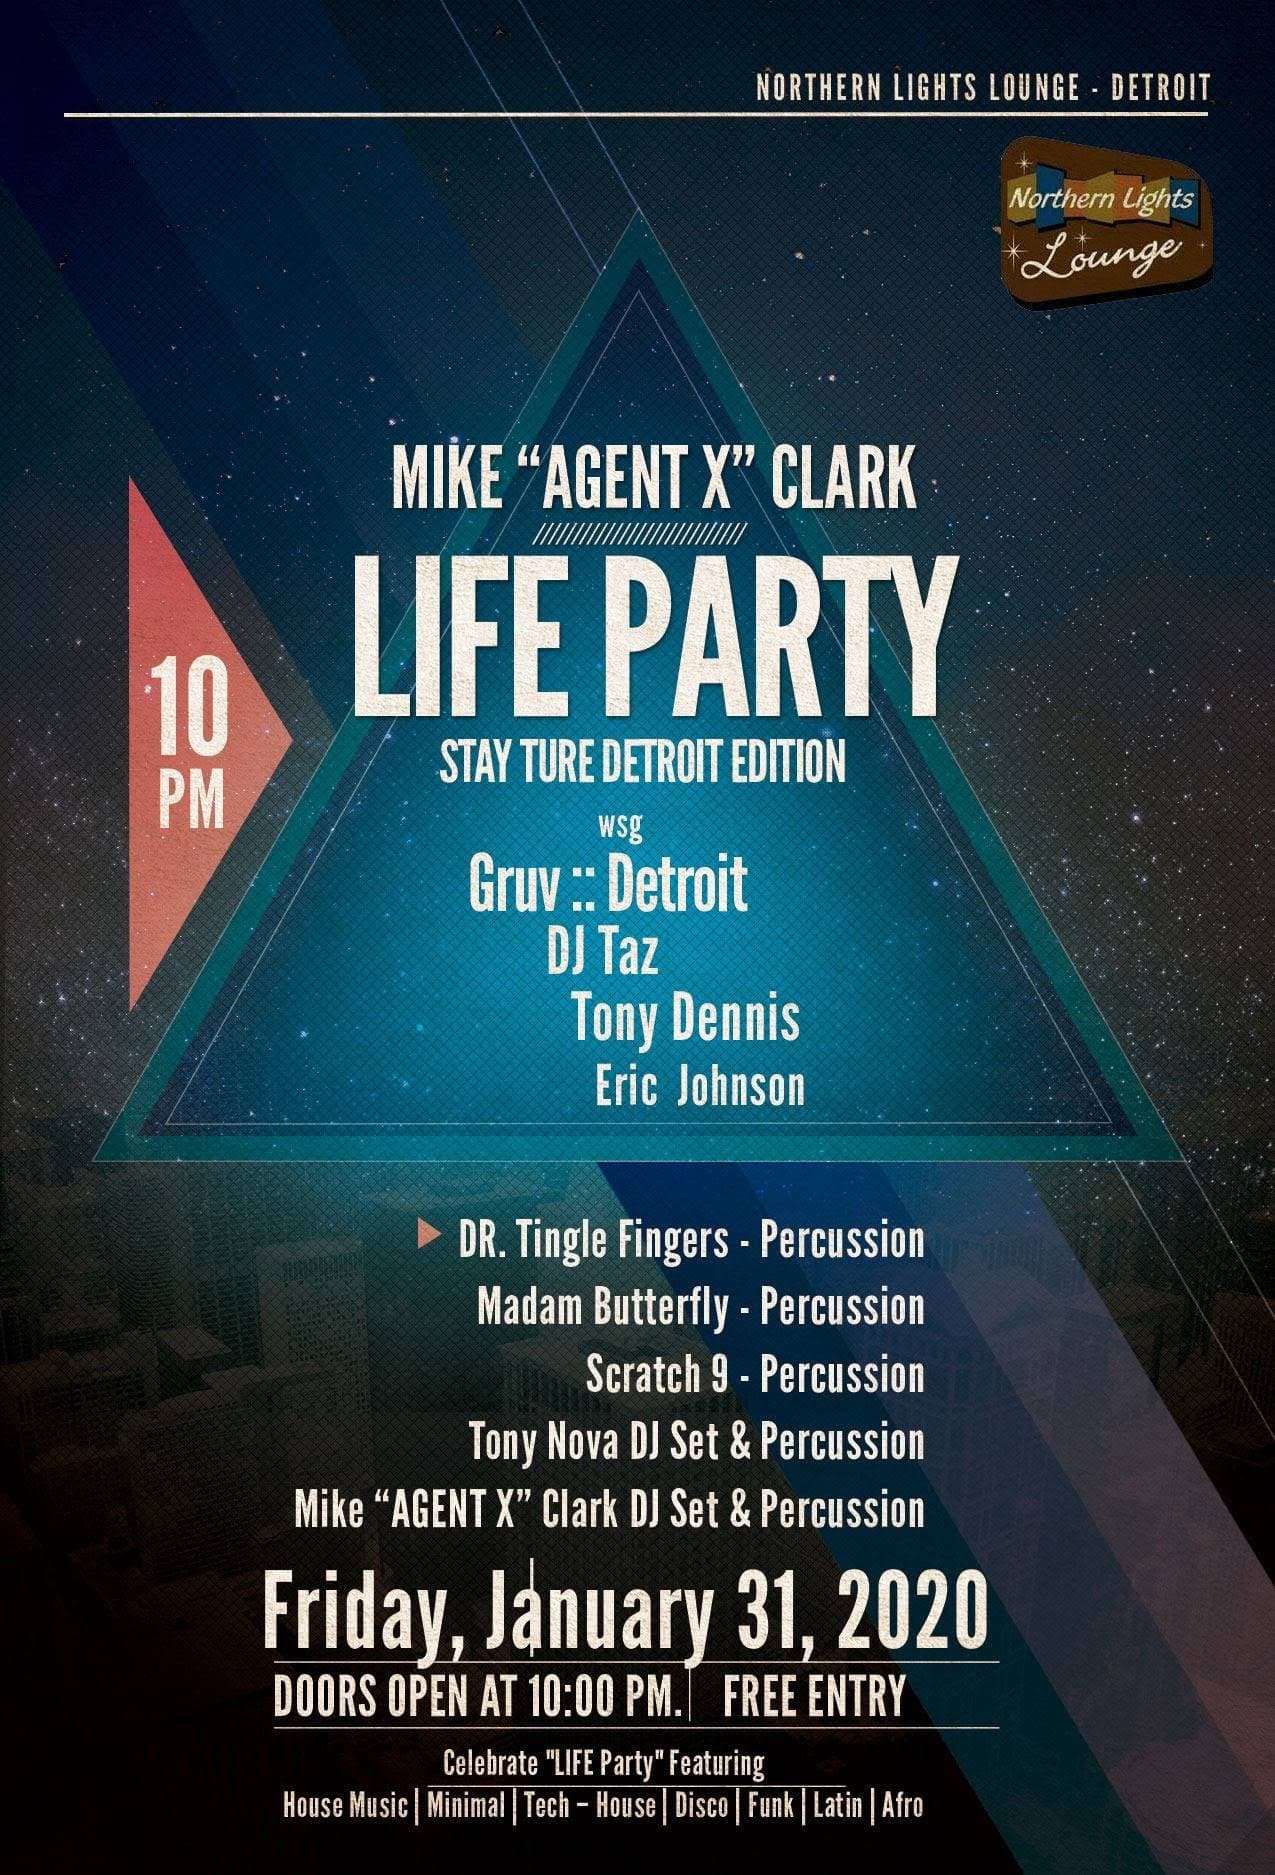 Life Party at Northern Lights Lounge Jan 31, 2020